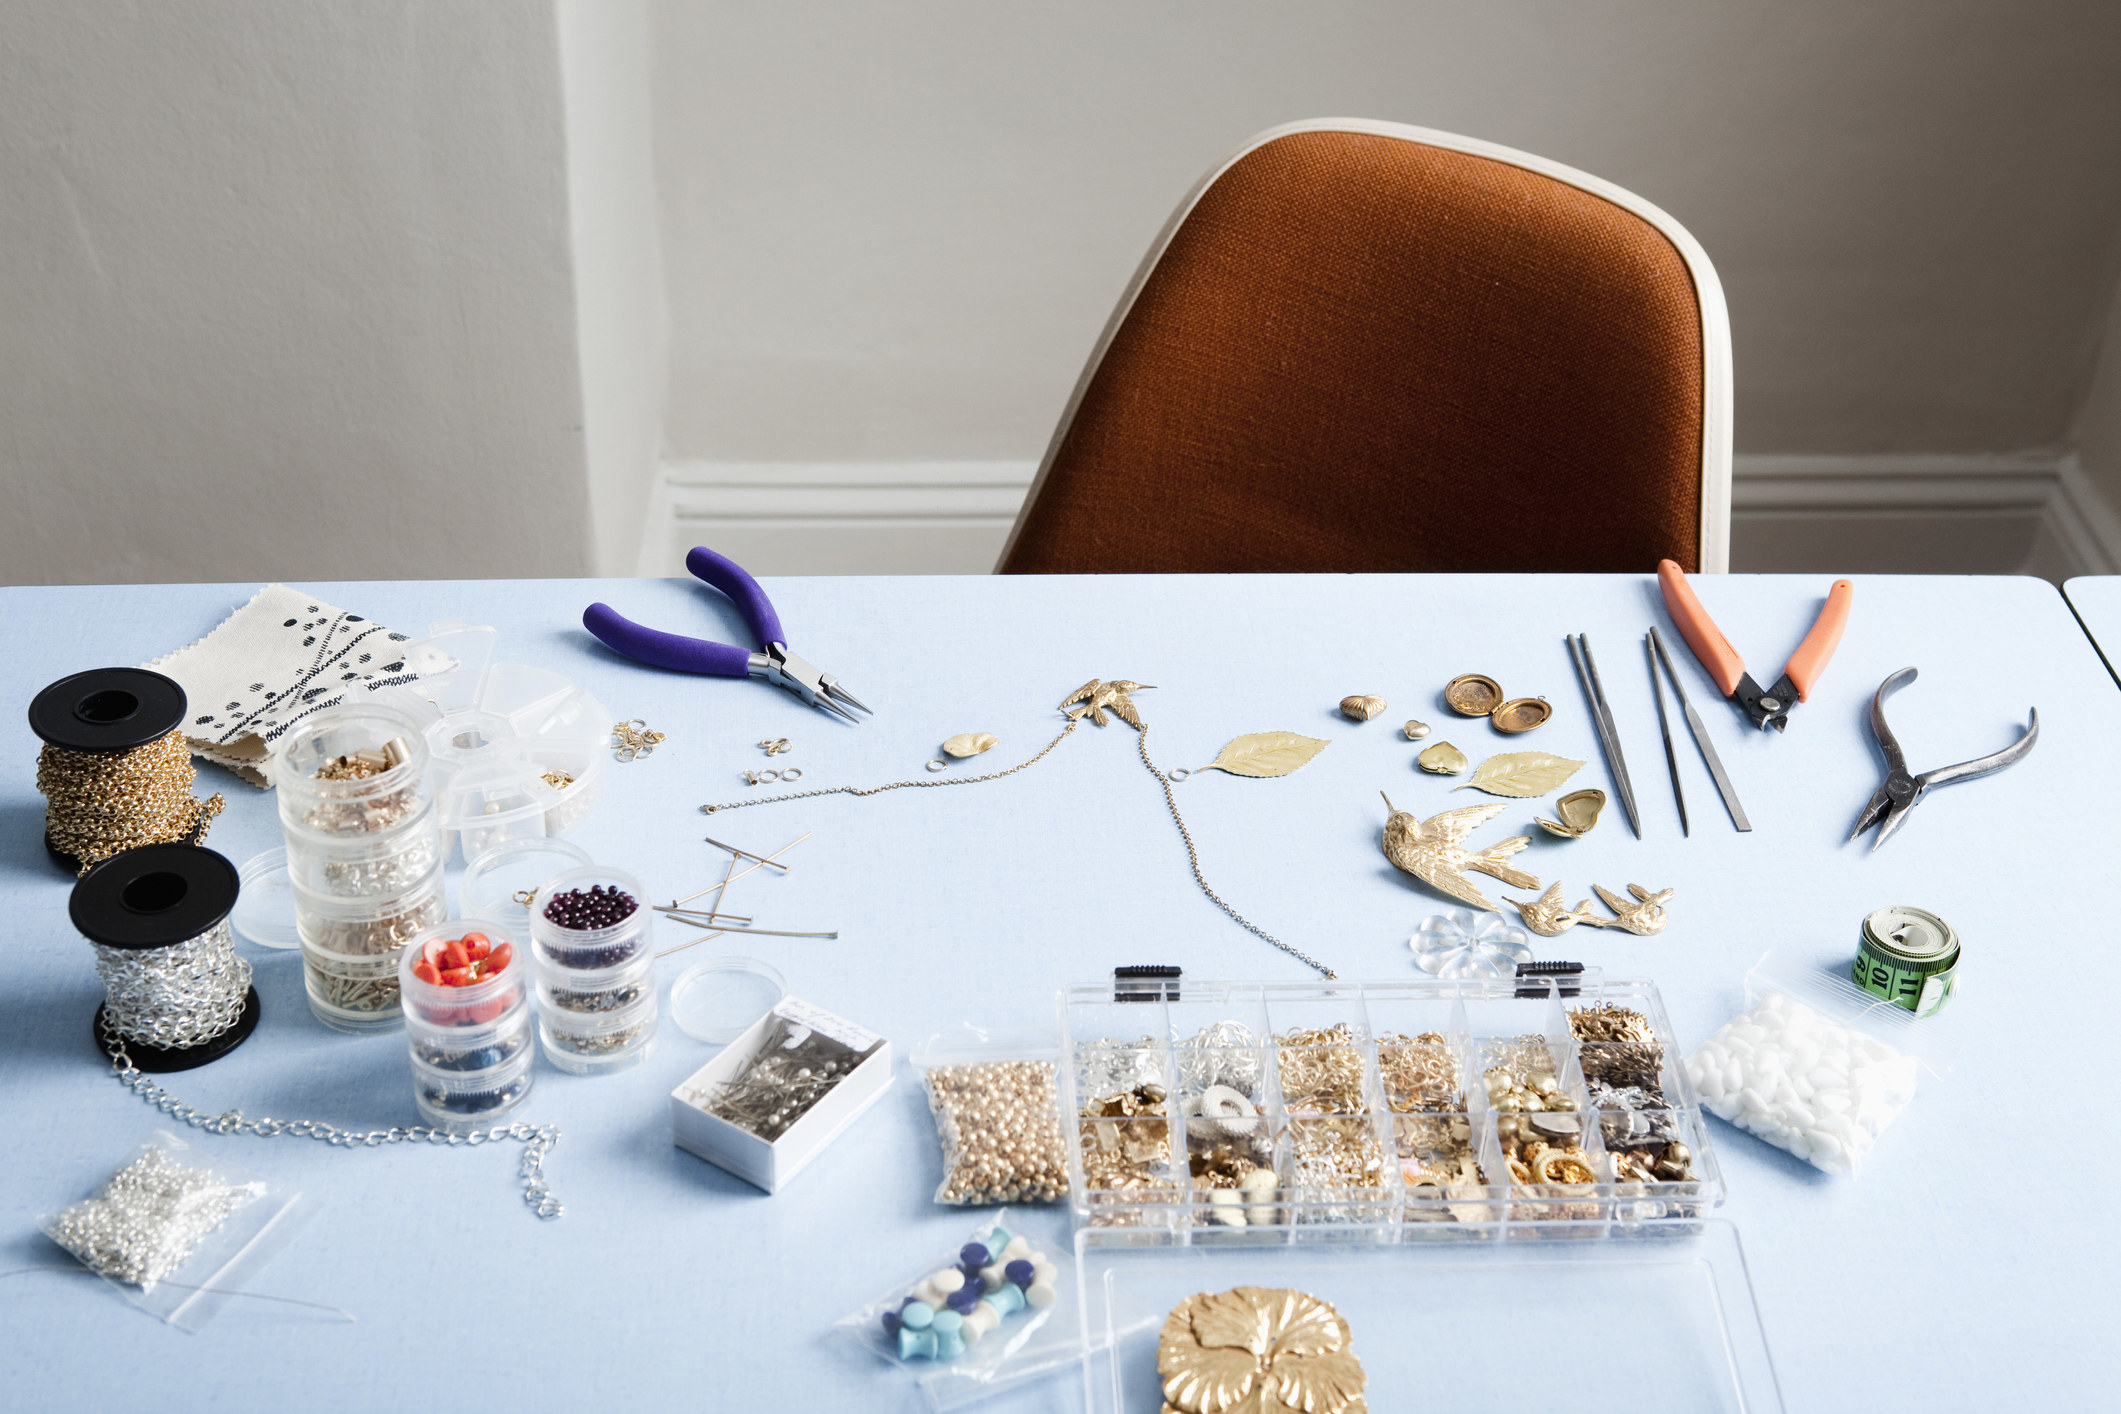 A table filled with materials to make jewelry